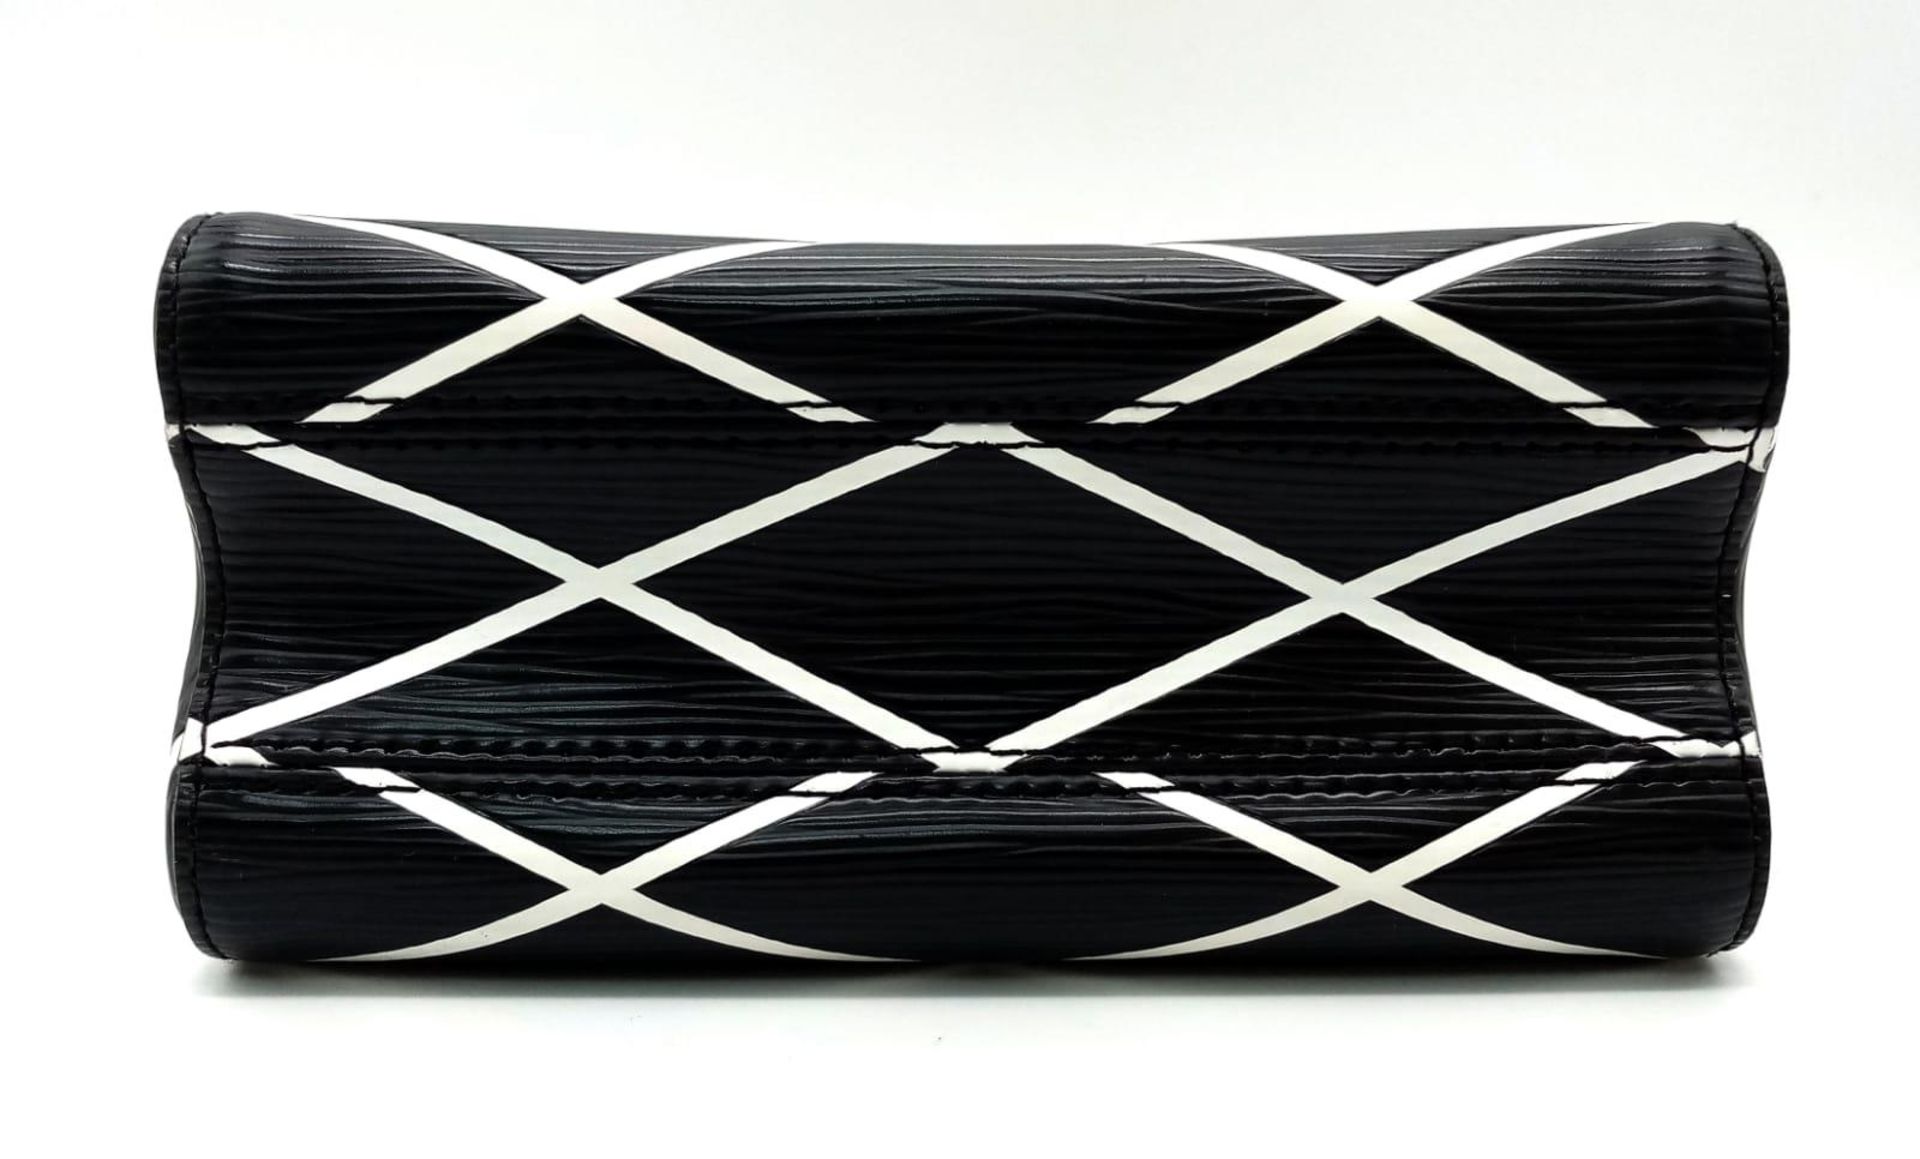 A Louis Vuitton Twist Shoulder Bag in Black Epi Leather with White Diamond Pattern, Silver Coloured - Image 6 of 9